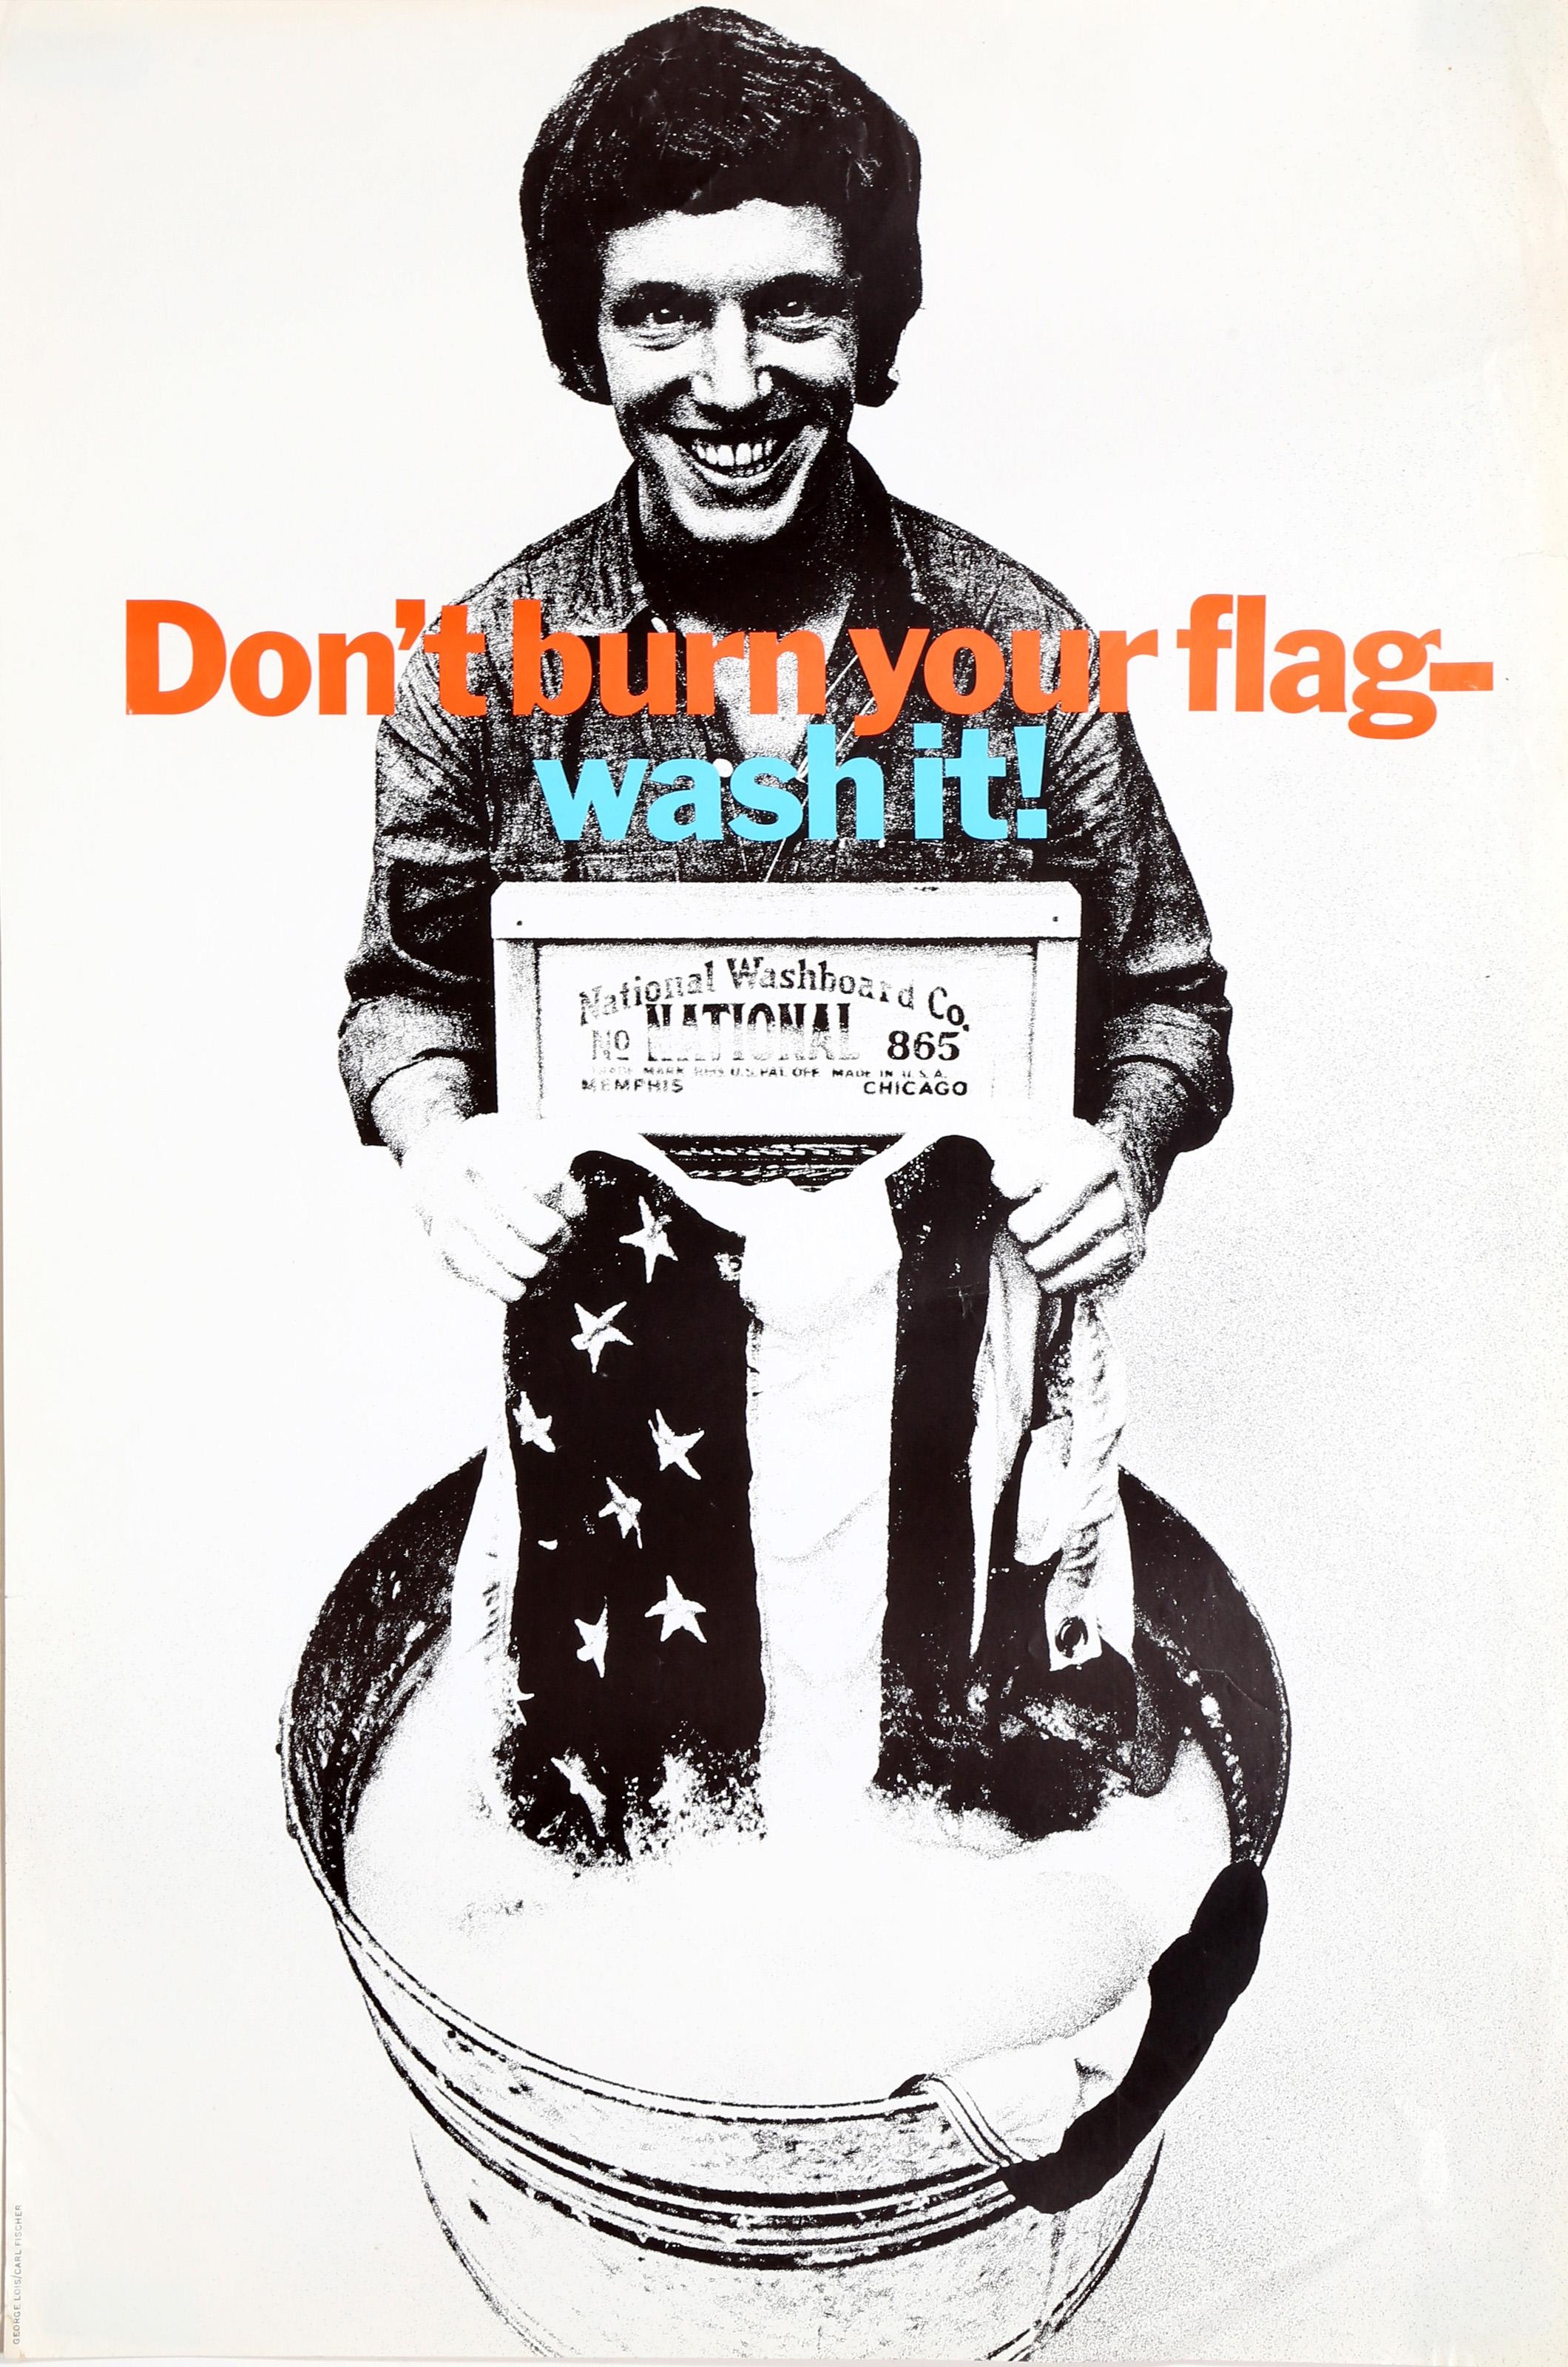 George Lois, Don't Burn Your Flag - Wash It, Poster - George Lois